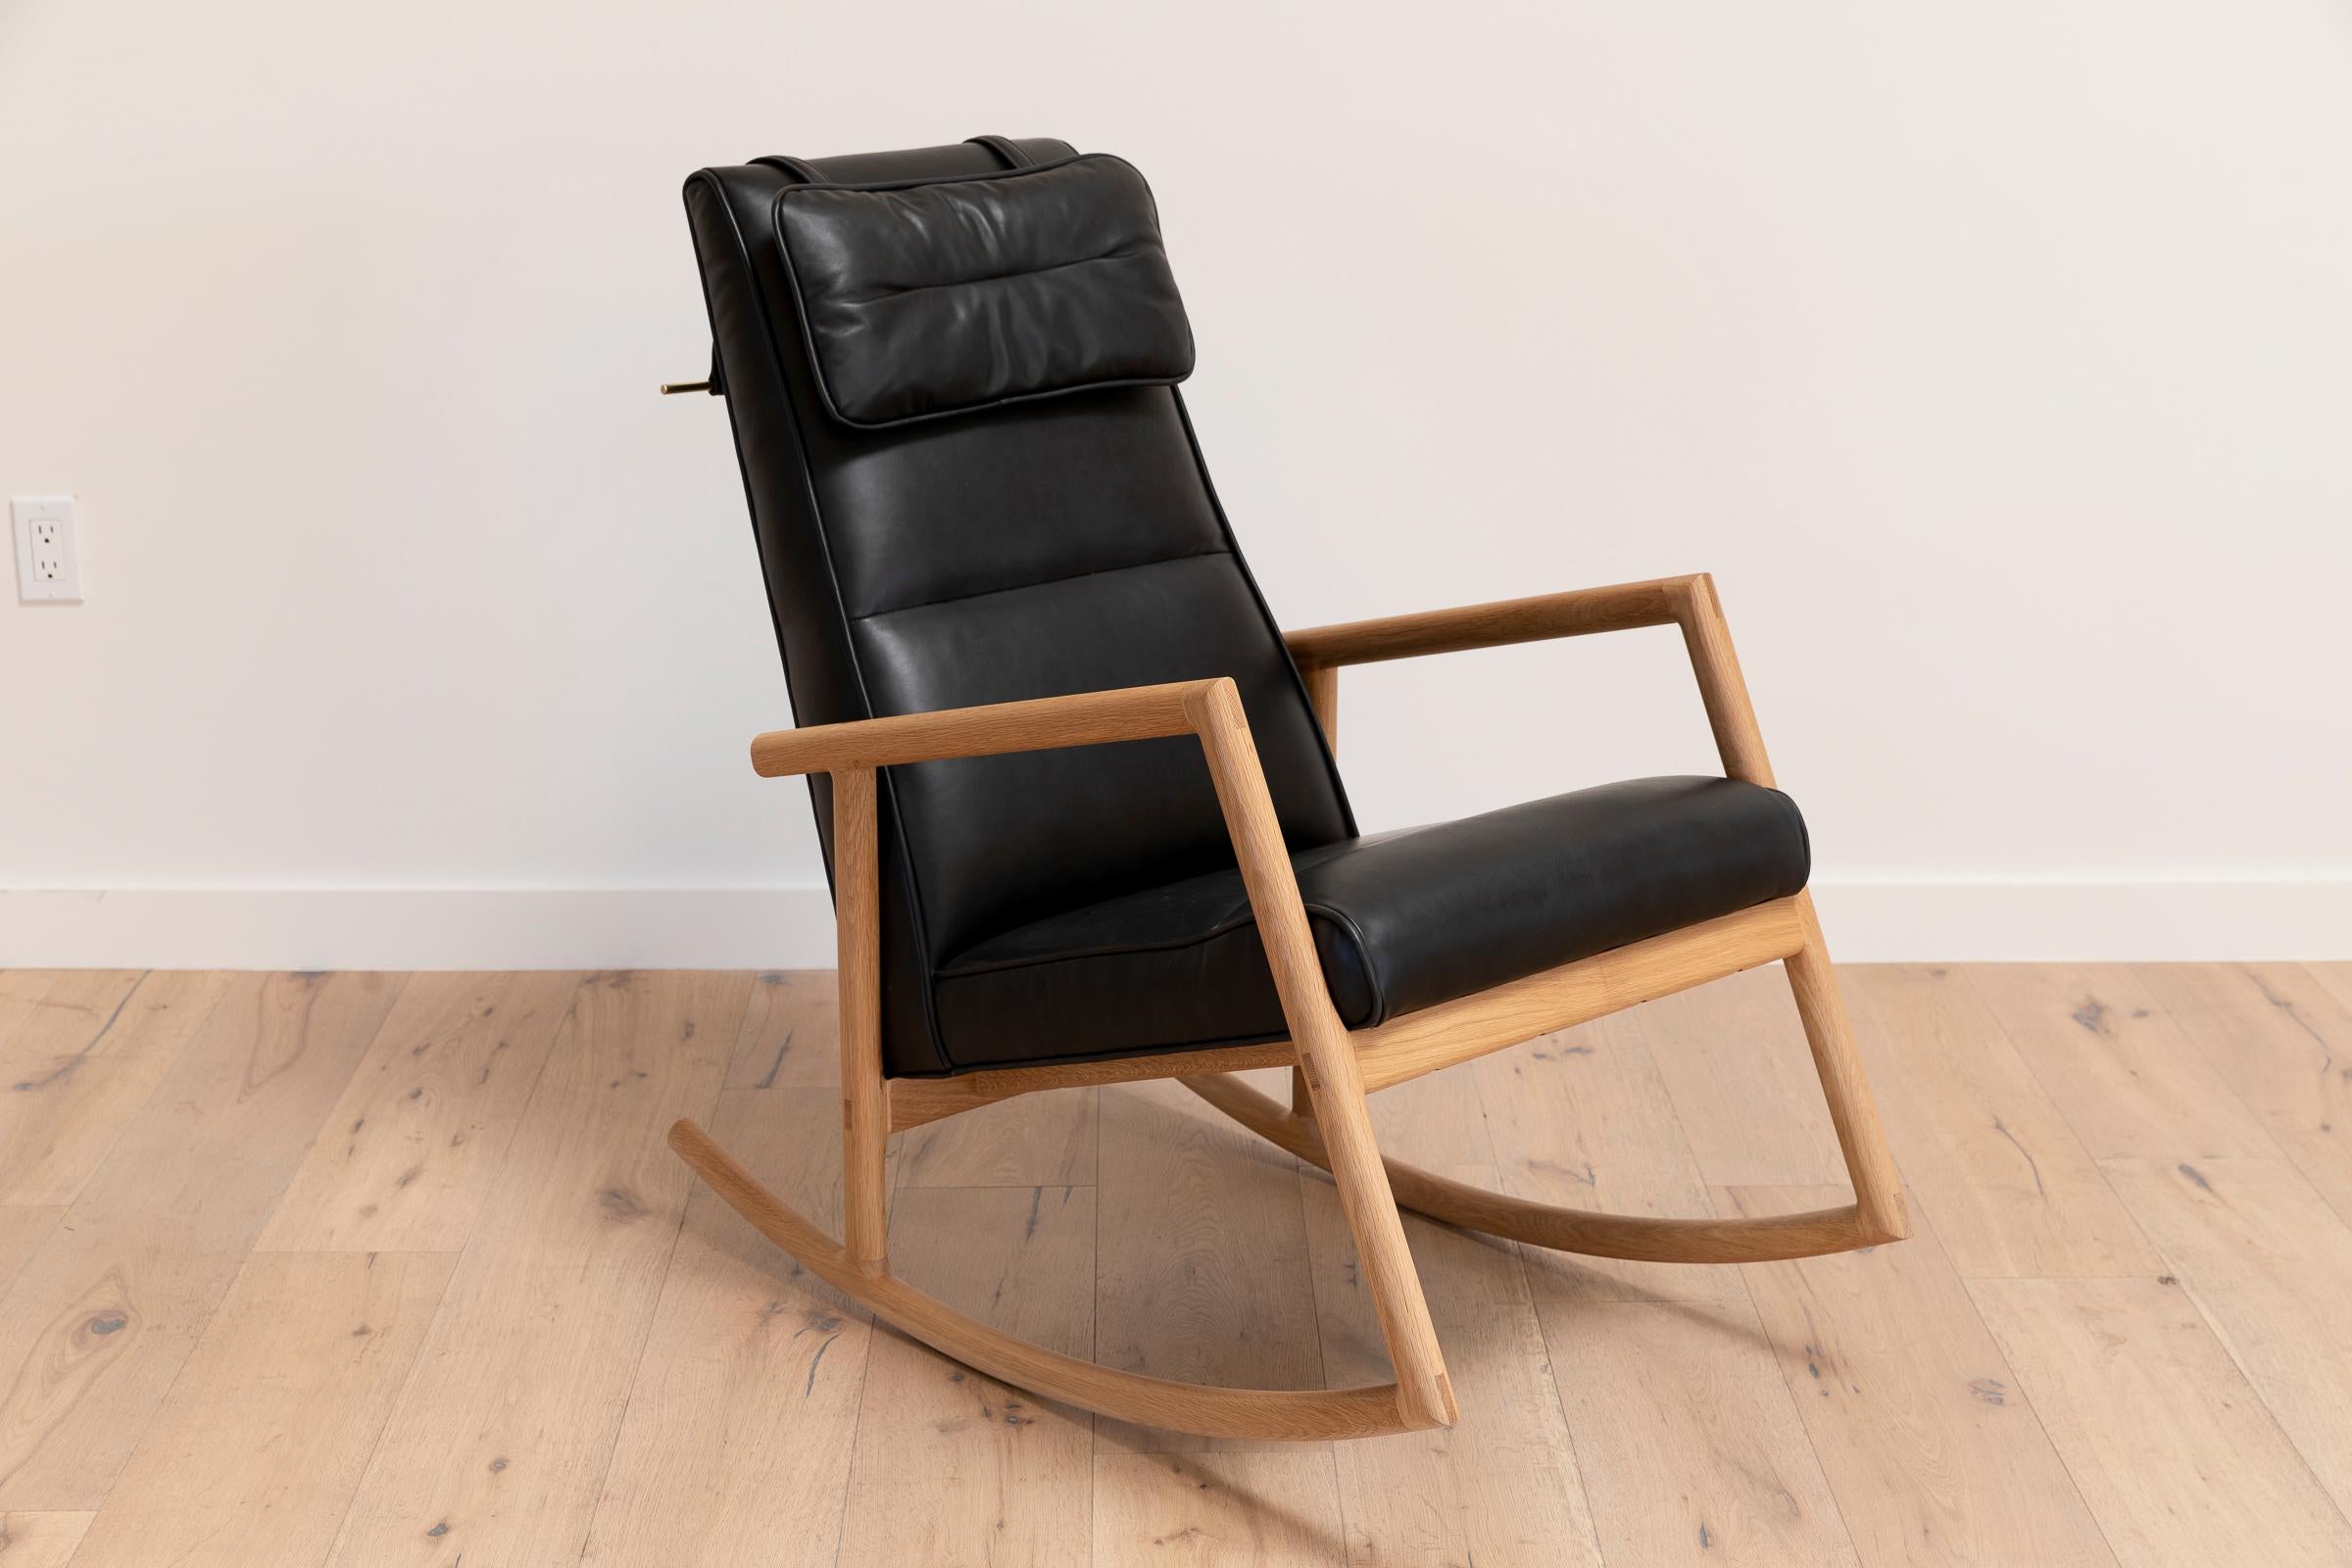 American Earl White Oak, Black Leather Moresby Rocking Chair For Sale